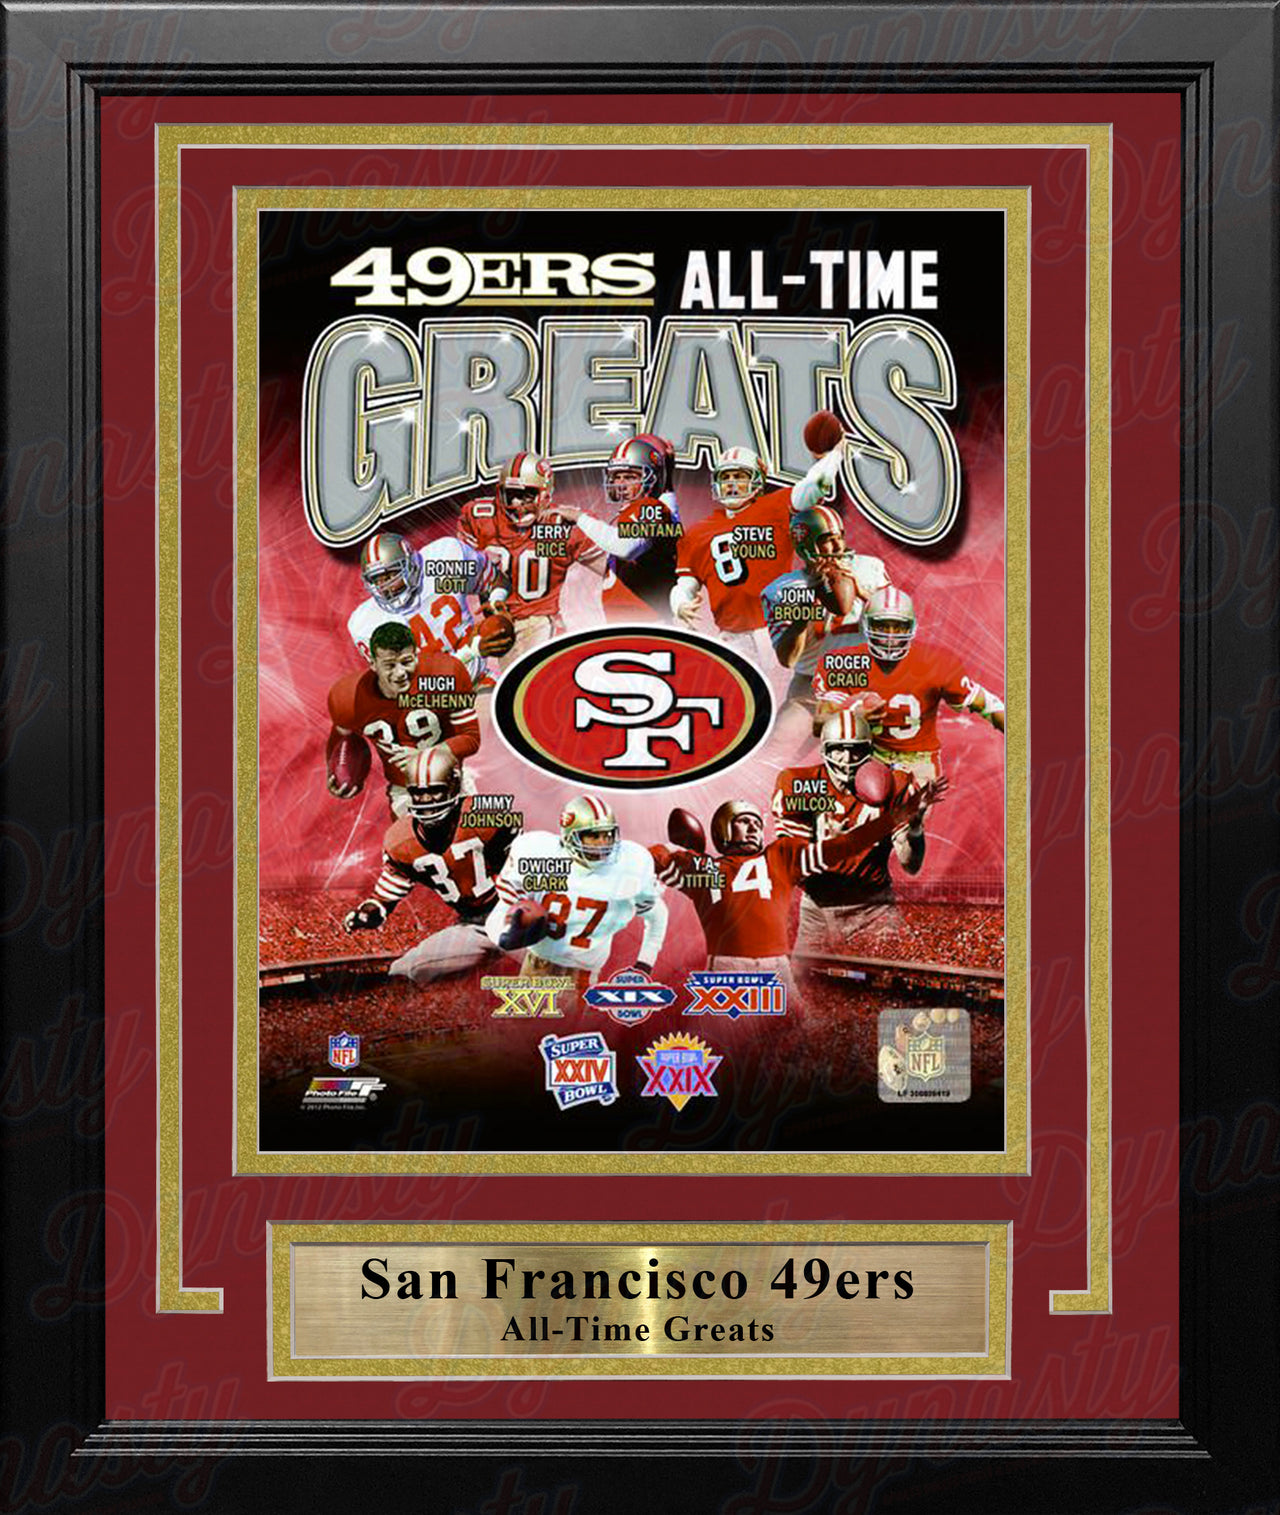 San Francisco 49ers All-Time Greats 8" x 10" Framed and Matted Photo - Dynasty Sports & Framing 